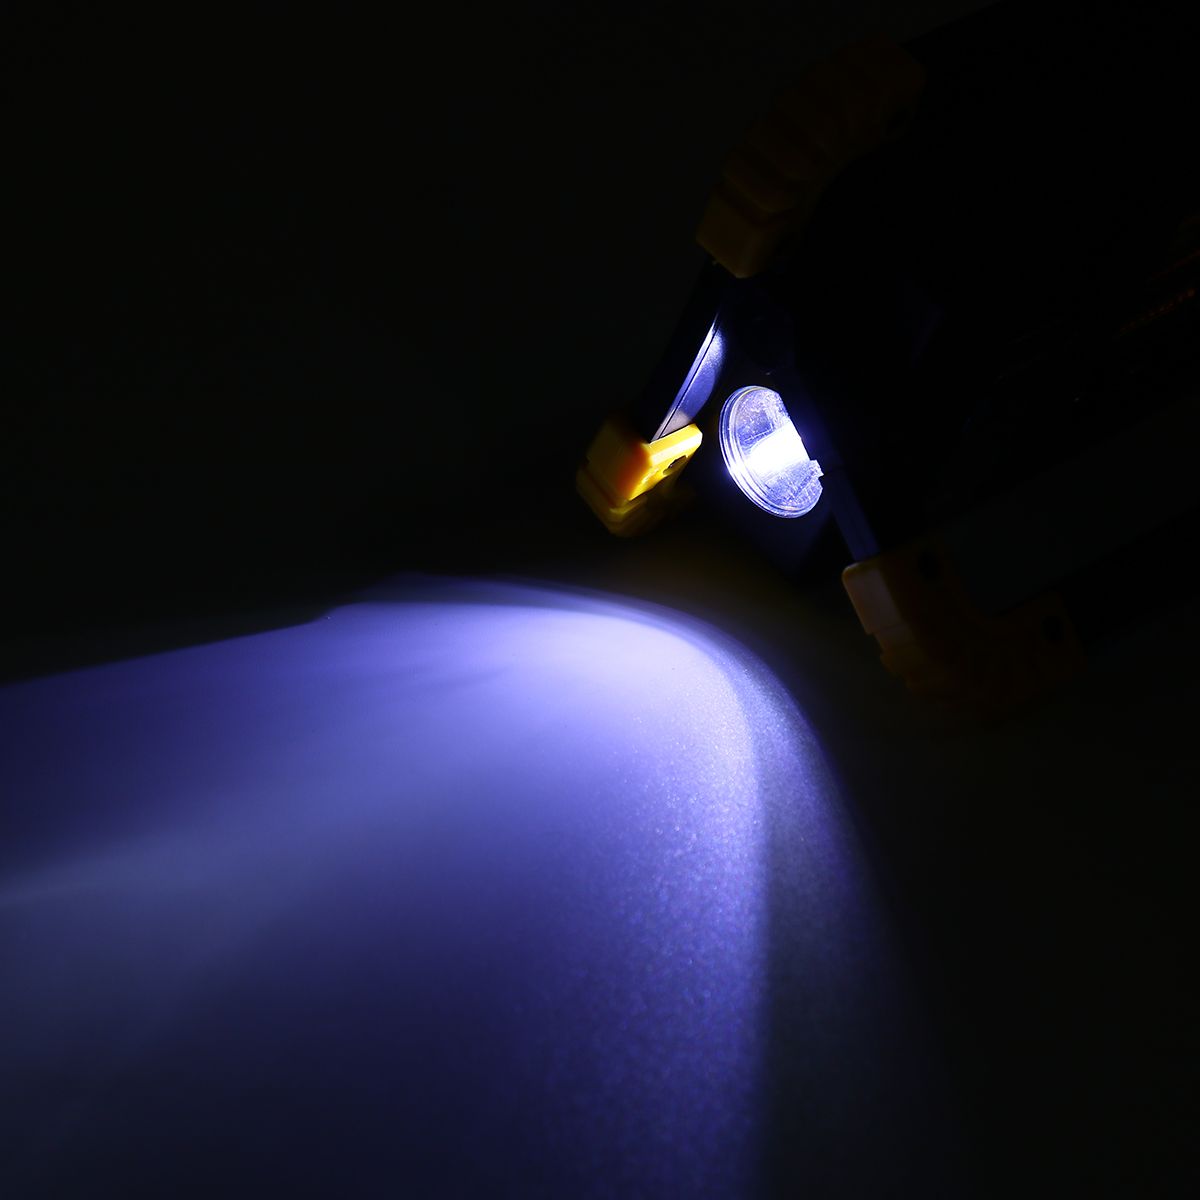 2-in-1-LED-Flashlight-Work-Light-USB-COB-Rechargeable-Camping-Lamp-Searchlight-1720618